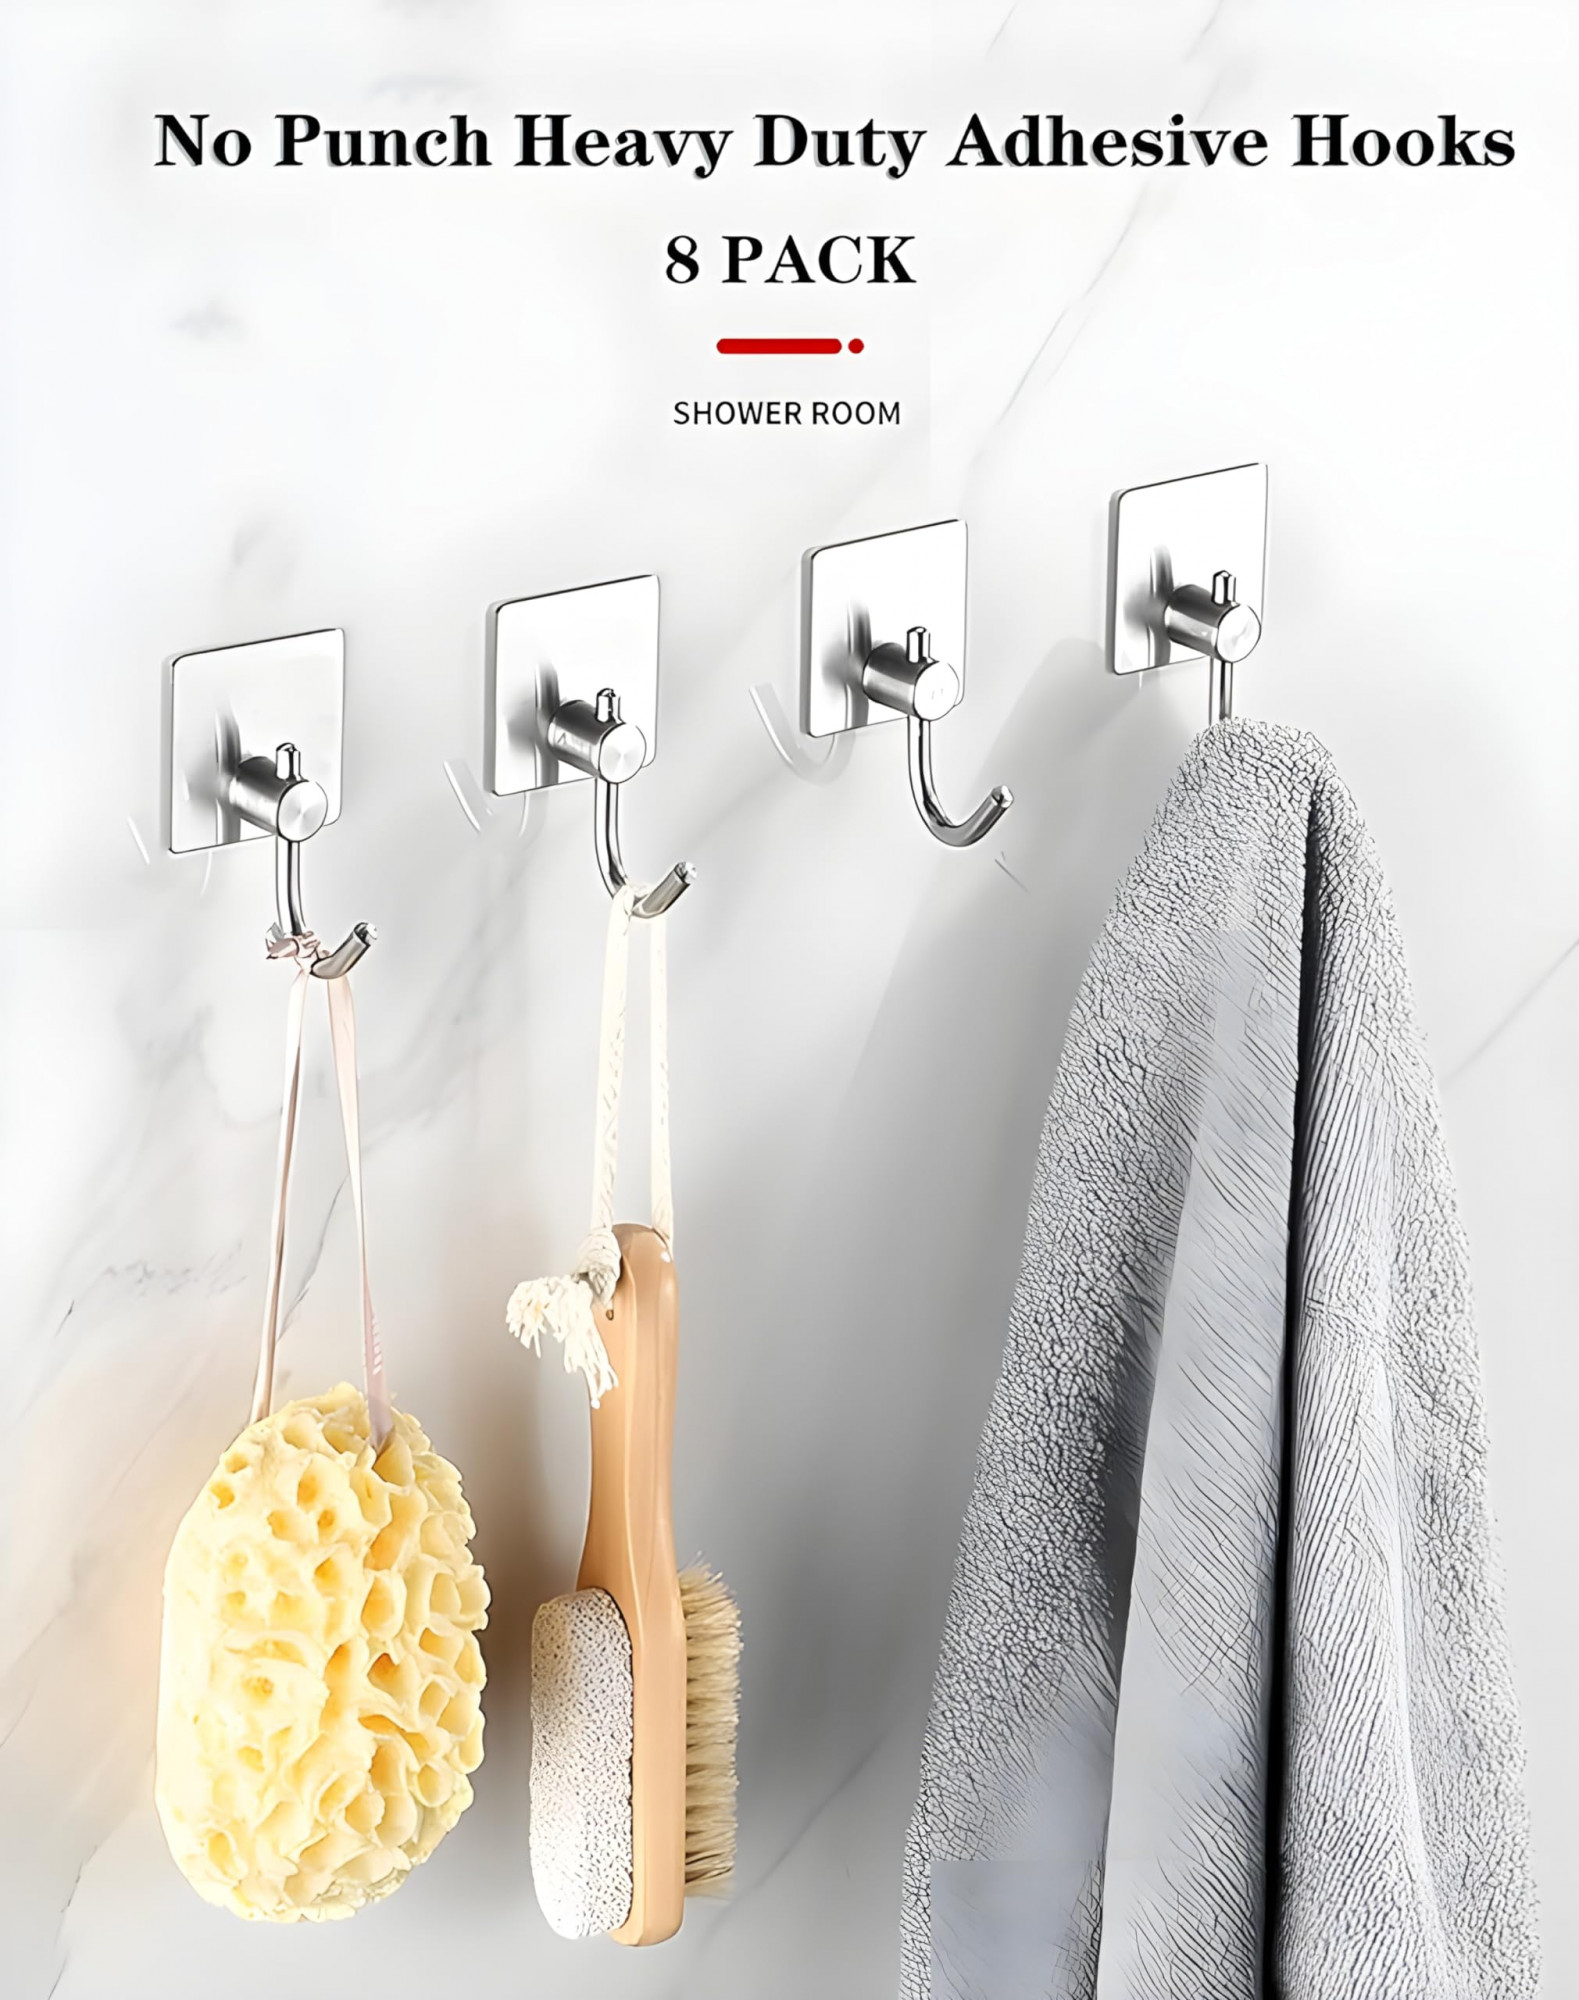 https://www.fastemi.com/uploads/fastemicom/products/jialto-10-pcs-self-adhesive-stainless-steel-hooks-heavy-duty-wall-hanging-solution-for-bathroom-amp-kitchen---waterproof-drill-free-strong-coattowel-wall-hooks-big-square-silver-hook-21752066302769_l.jpg